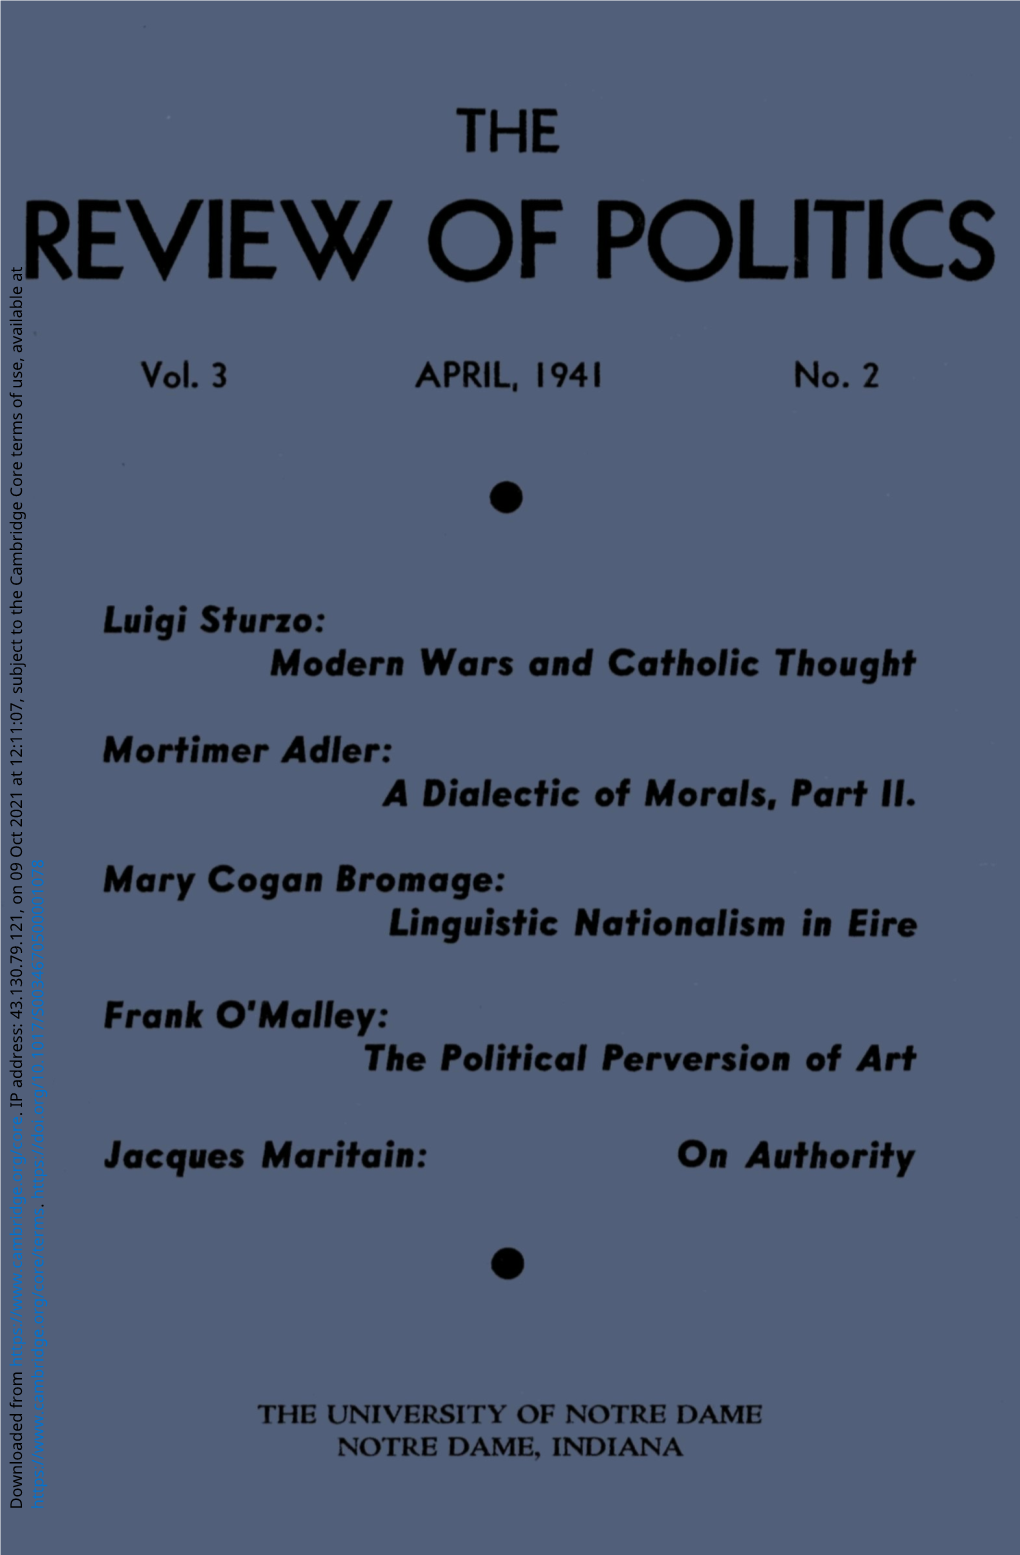 ROP Volume 3 Issue 2 Cover and Front Matter